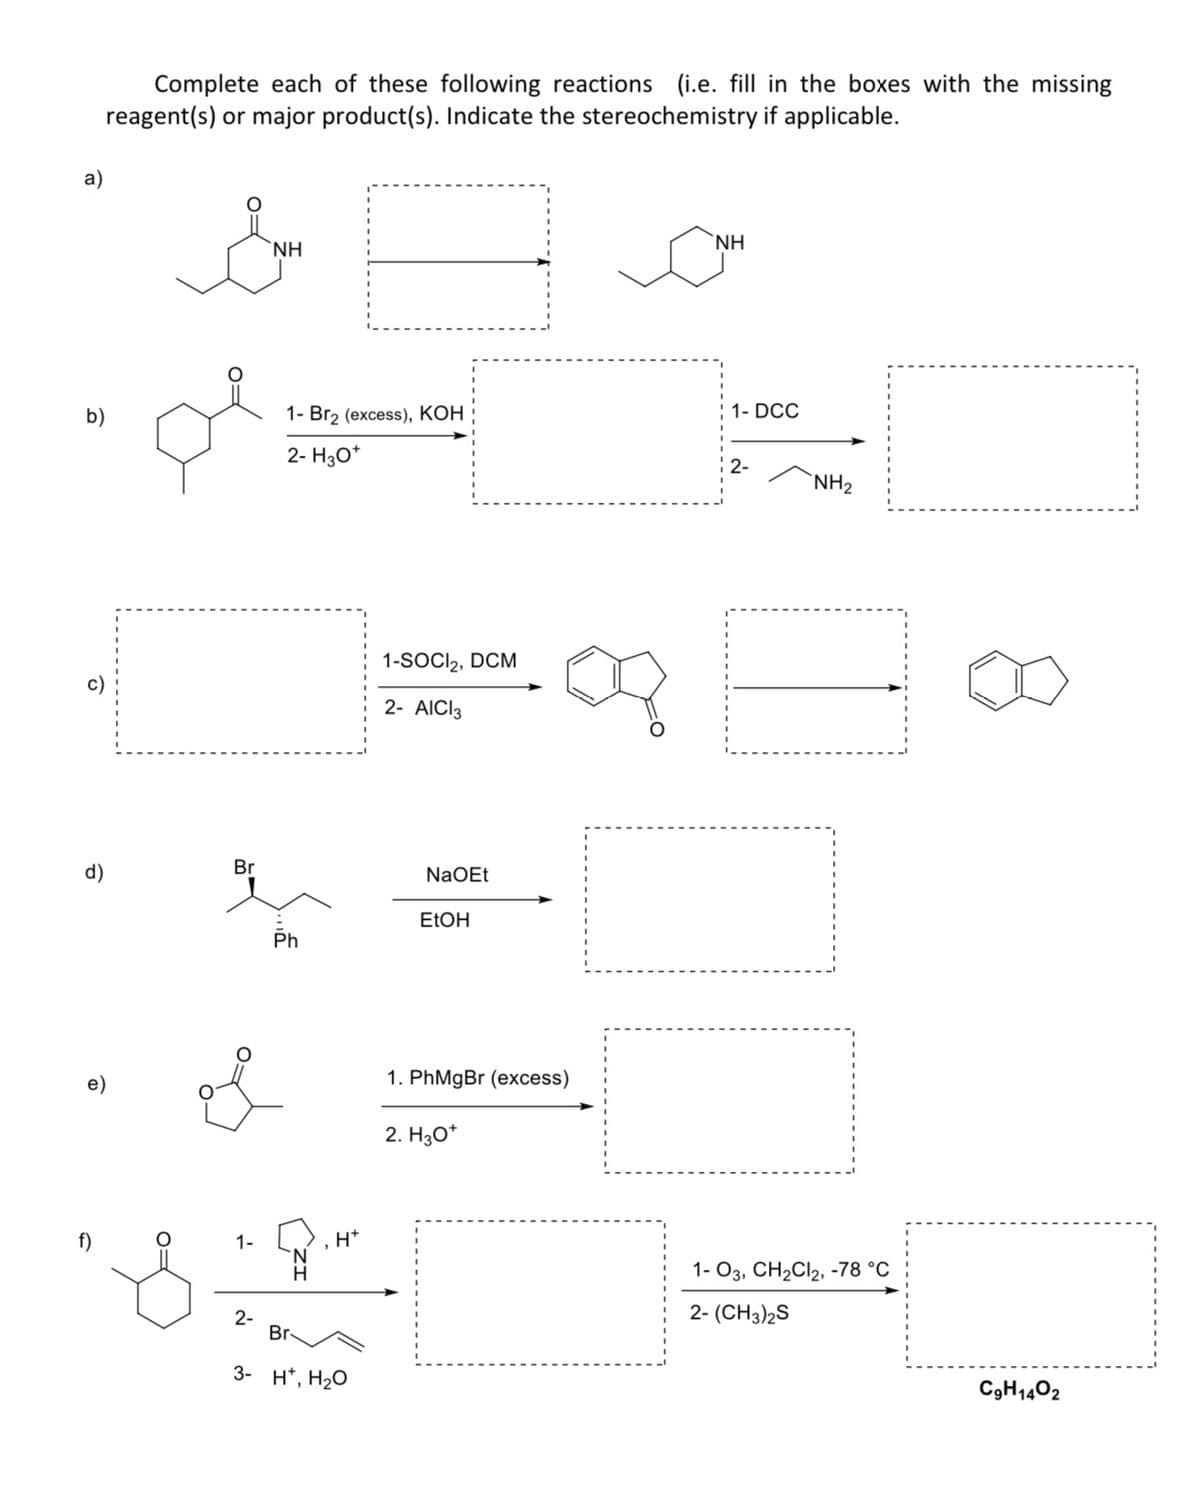 a)
b)
d)
Complete each of these following reactions (i.e. fill in the boxes with the missing
reagent(s) or major product(s). Indicate the stereochemistry if applicable.
D
Br
1-
2-
NH
1- Br₂ (excess), KOH
2- H3O*
Ph
Br-
H*
3- H¹, H₂O
1-SOCI₂, DCM
2- AICI 3
NaOEt
EtOH
1. PhMgBr (excess)
2. H3O*
NH
1- DCC
2-
NH₂
1-03, CH₂Cl2, -78 °C
2-(CH3)2S
C9H1402